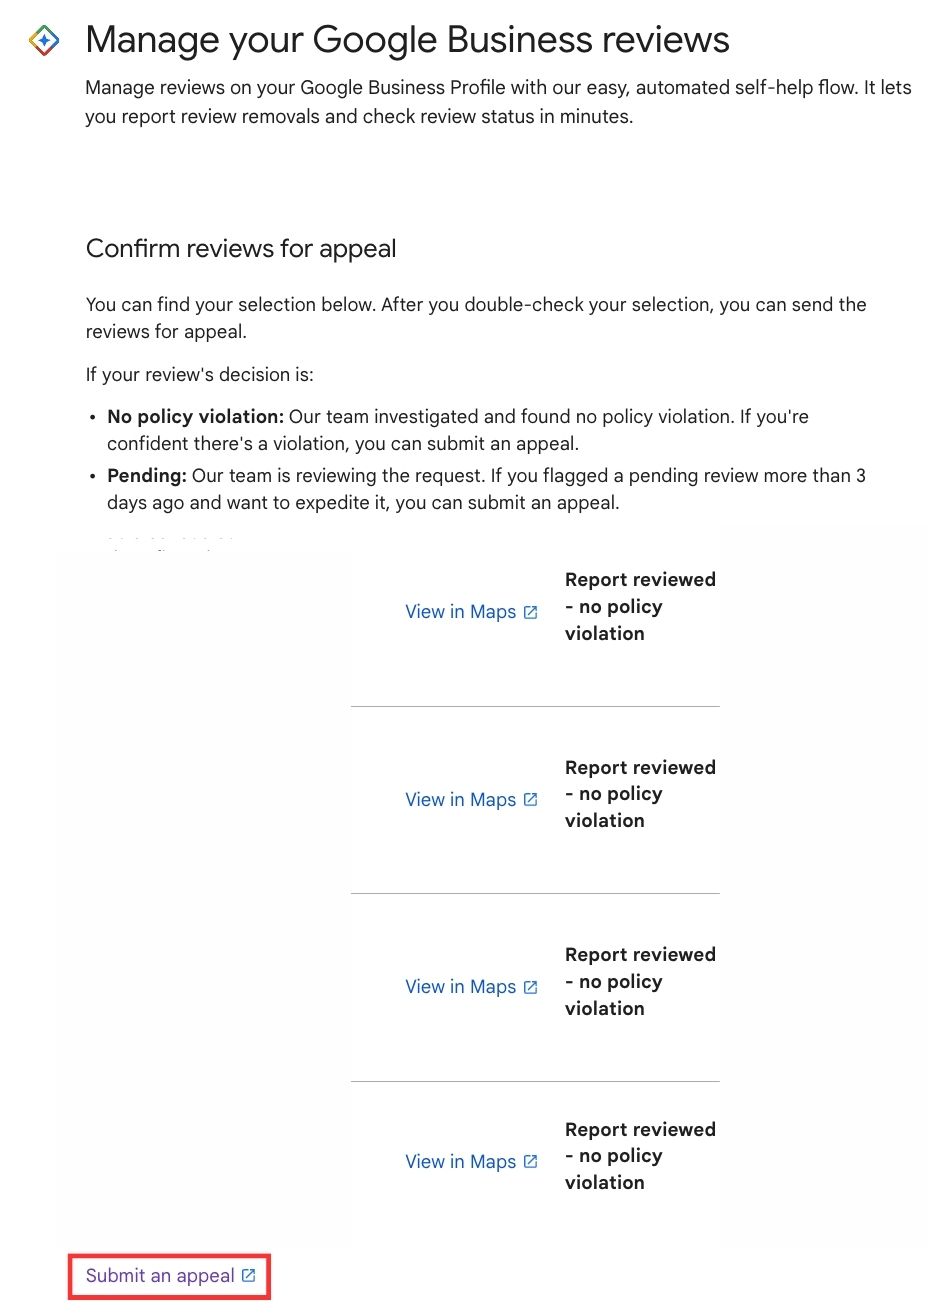 Google Review Management Tool report submit appeal